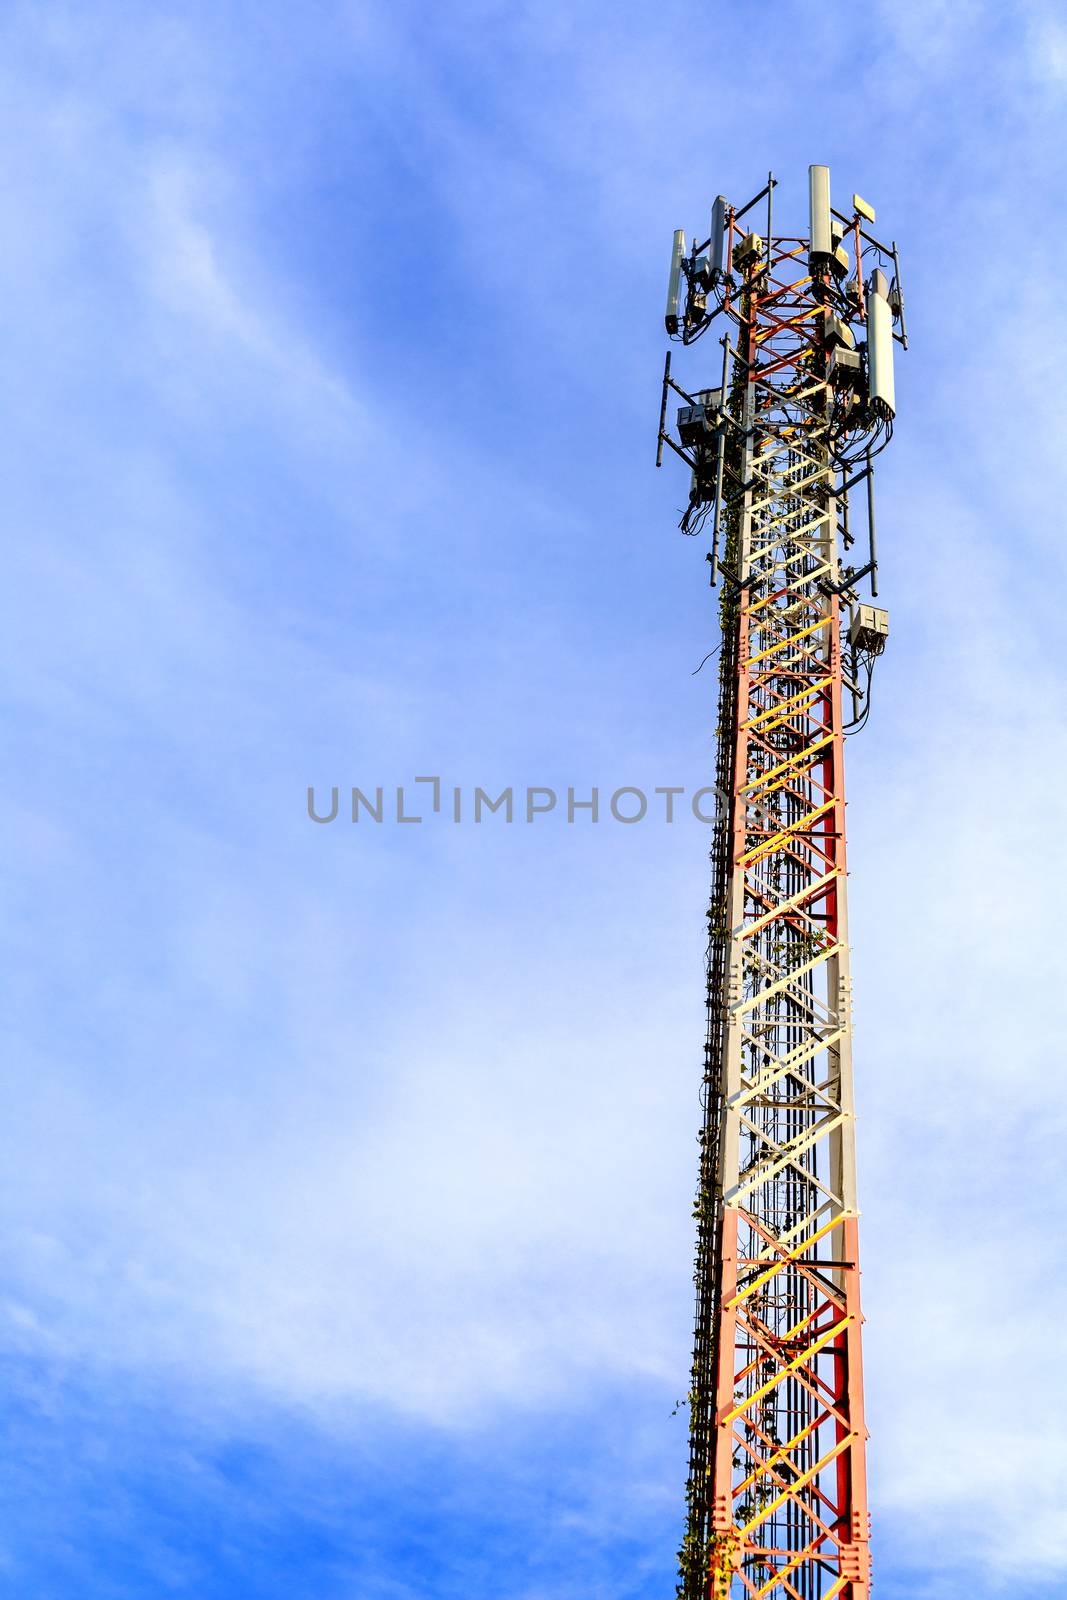 mobile phone communication and network signal repeater antenna tower with blue sky background